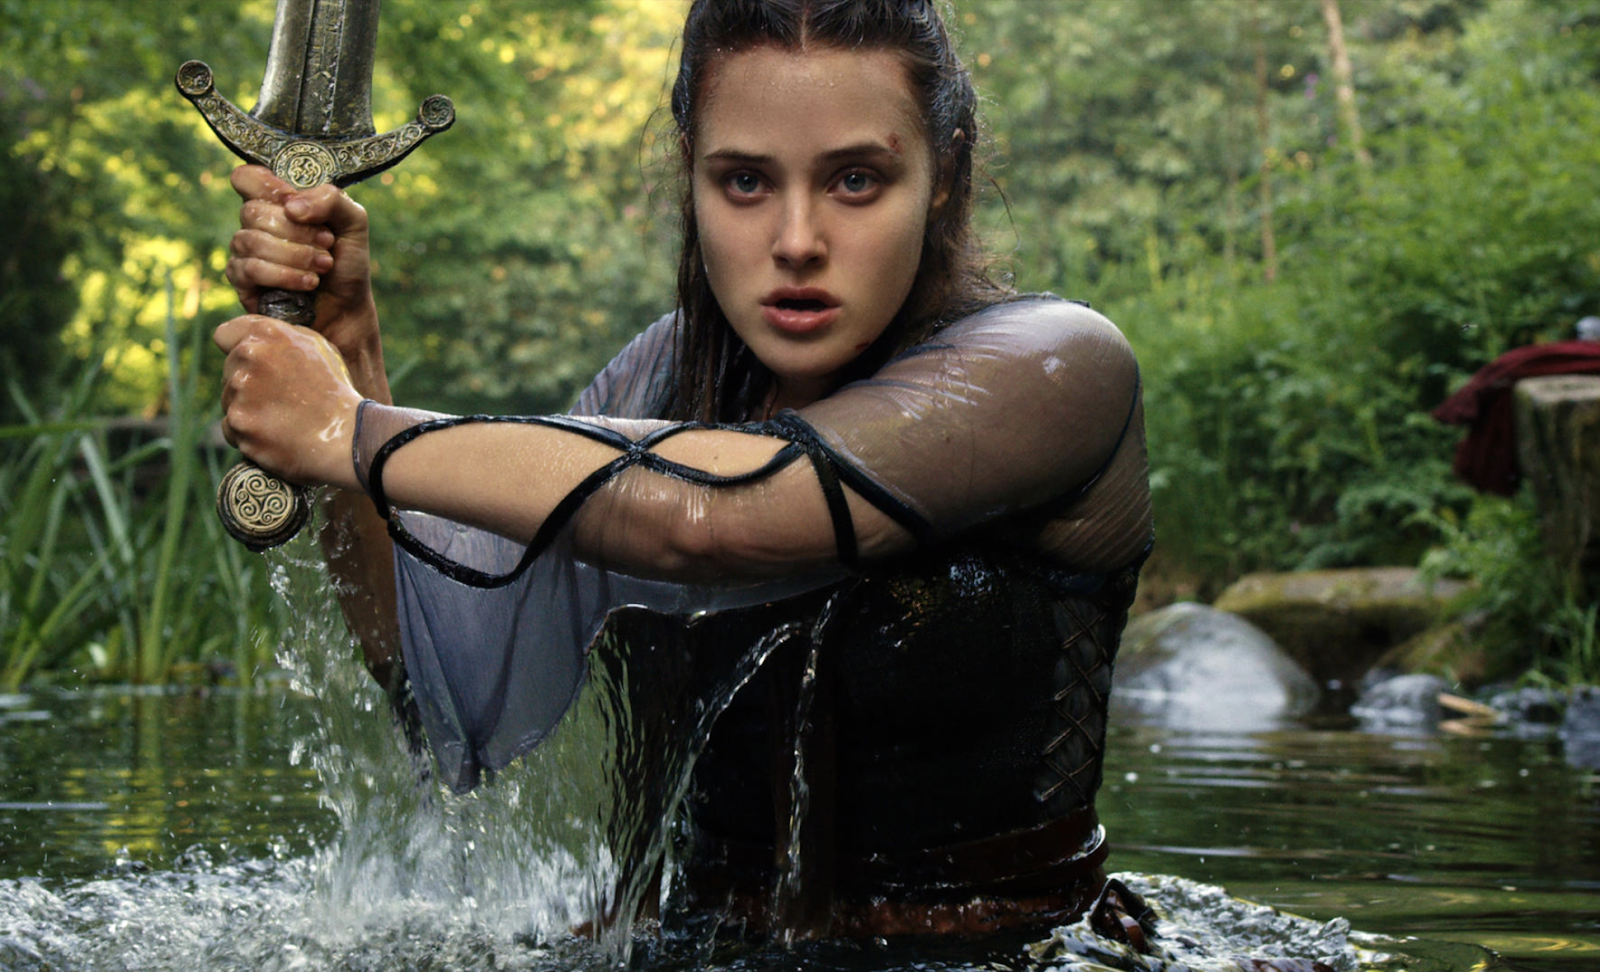 LOOK: Netflix's CURSED Starring Katherine Langford Releases First Photos